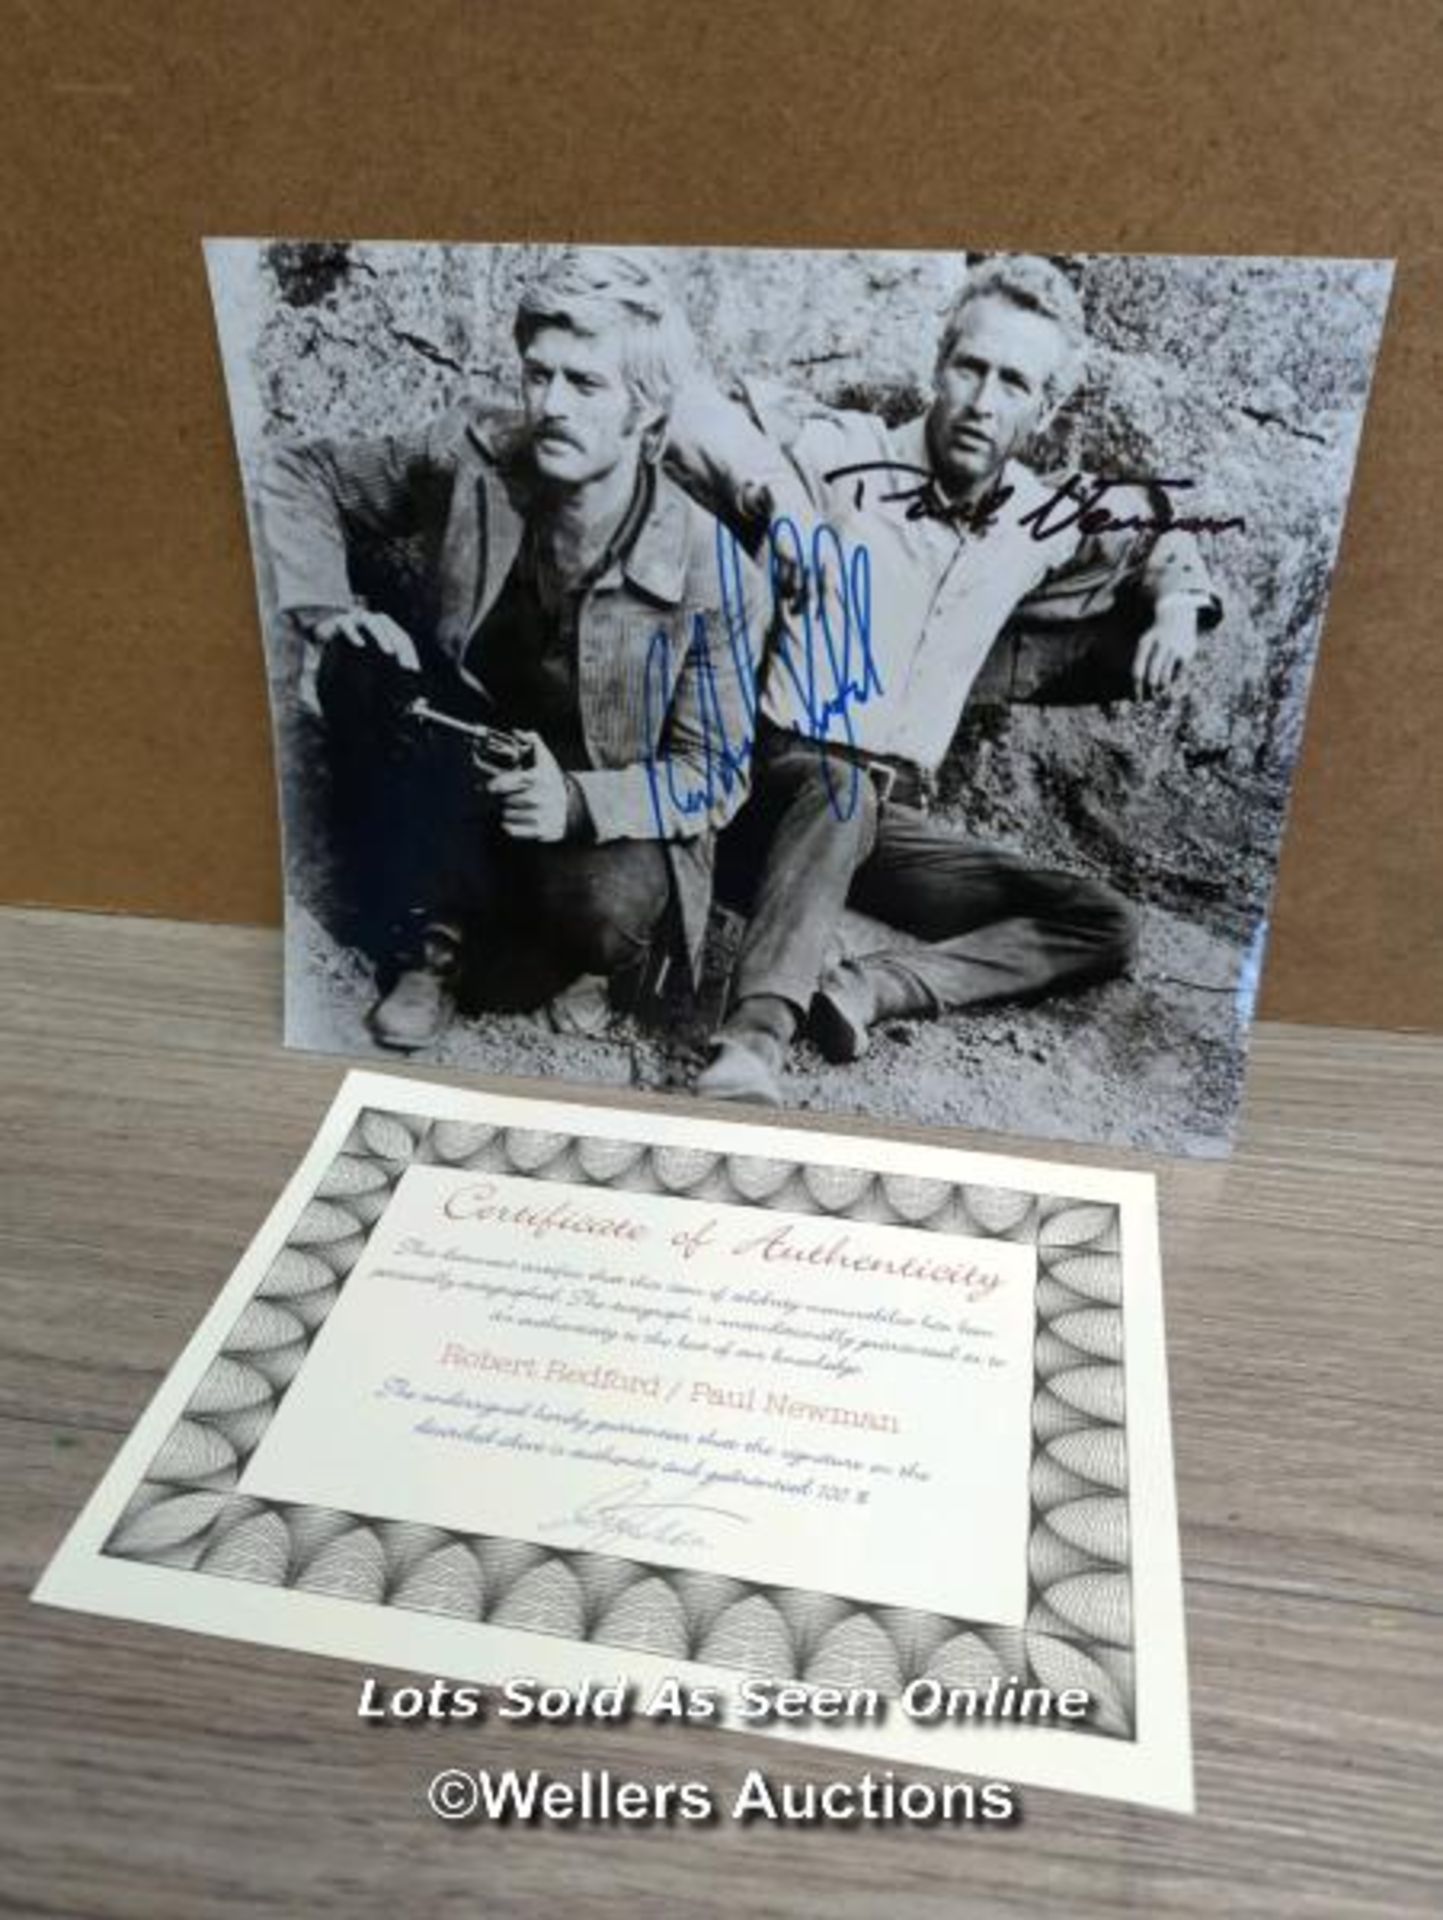 ROBERT REDFORD AND PAUL NEWMAN - PHOTO FROM BUTCH CASSIDY BEARING BOTH SIGNATURES WITH COAL